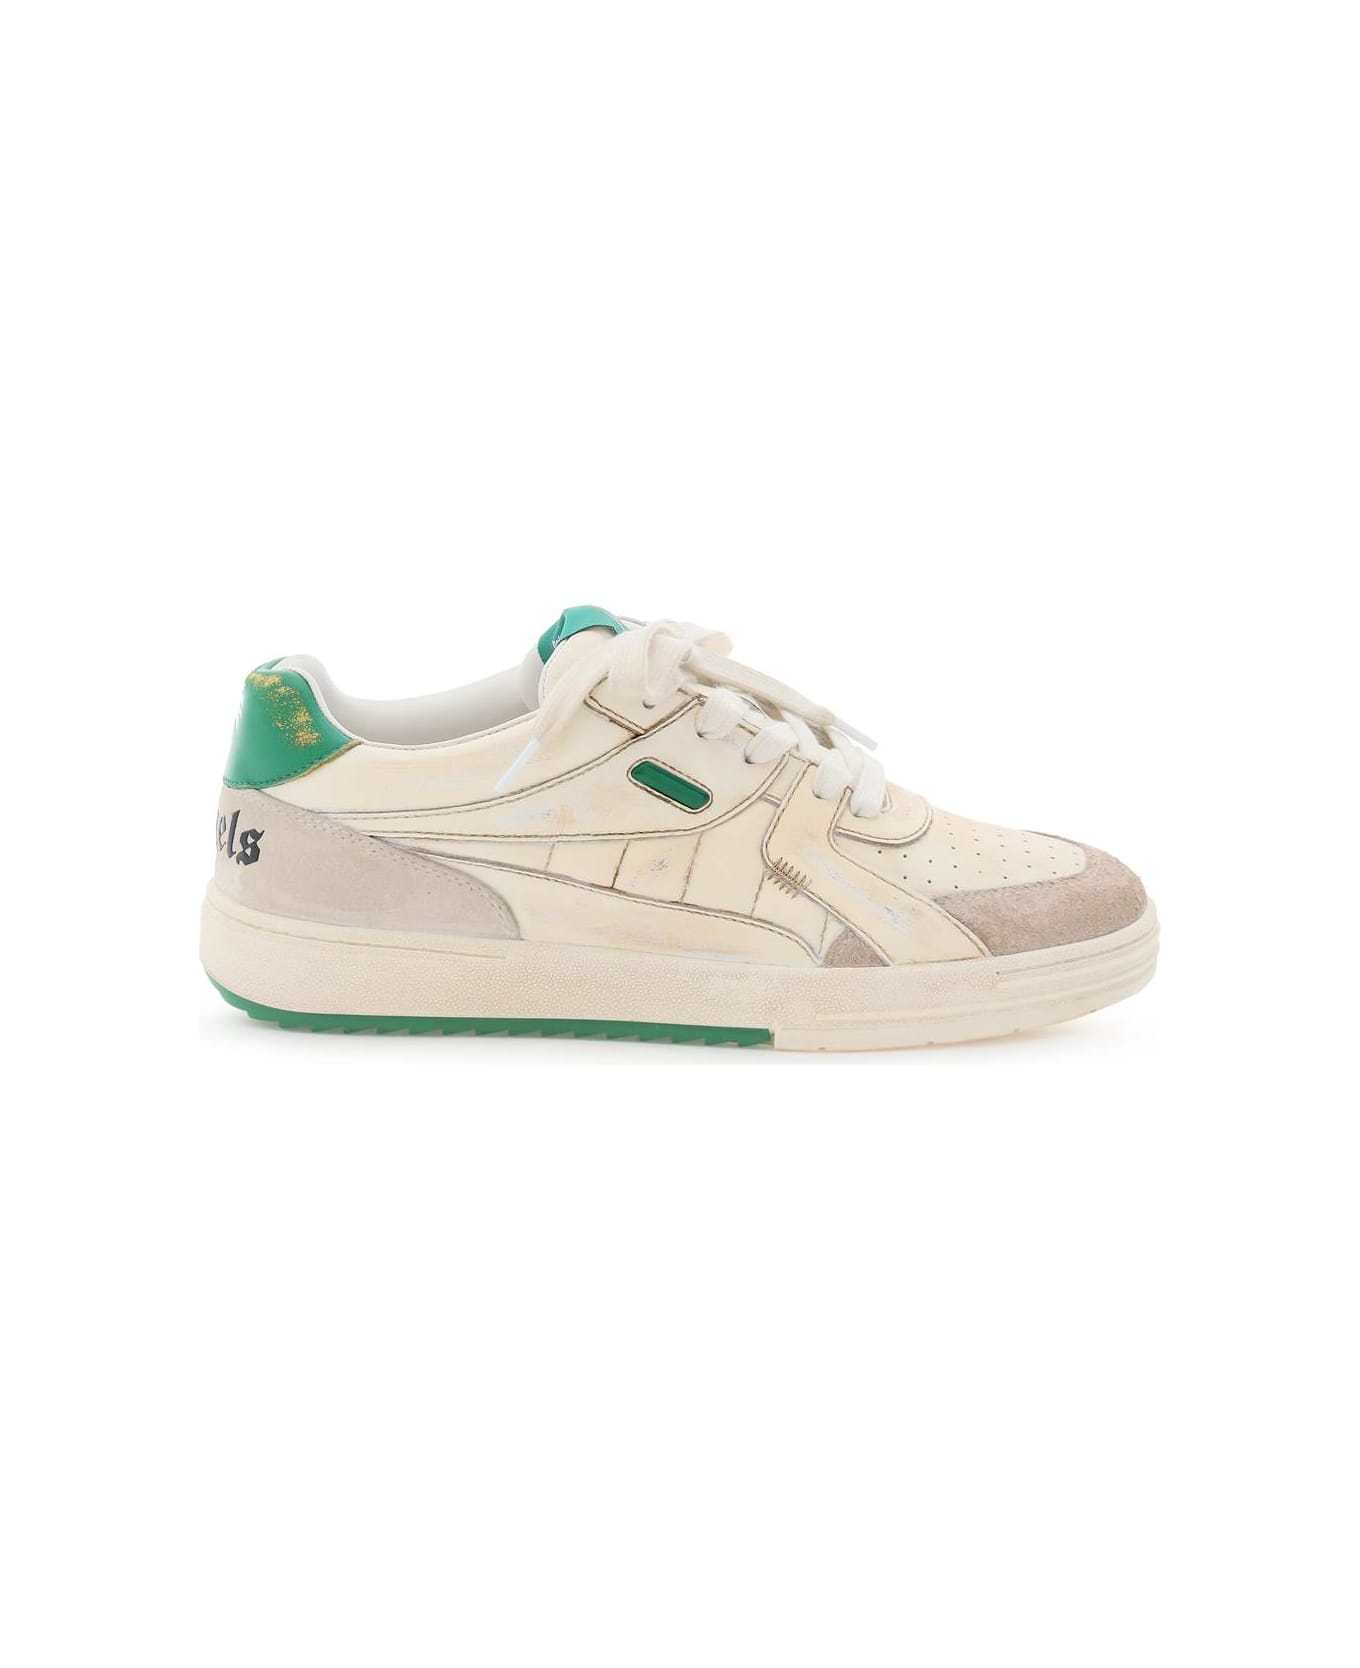 Palm Angels University Leather Sneakers - White Green スニーカー